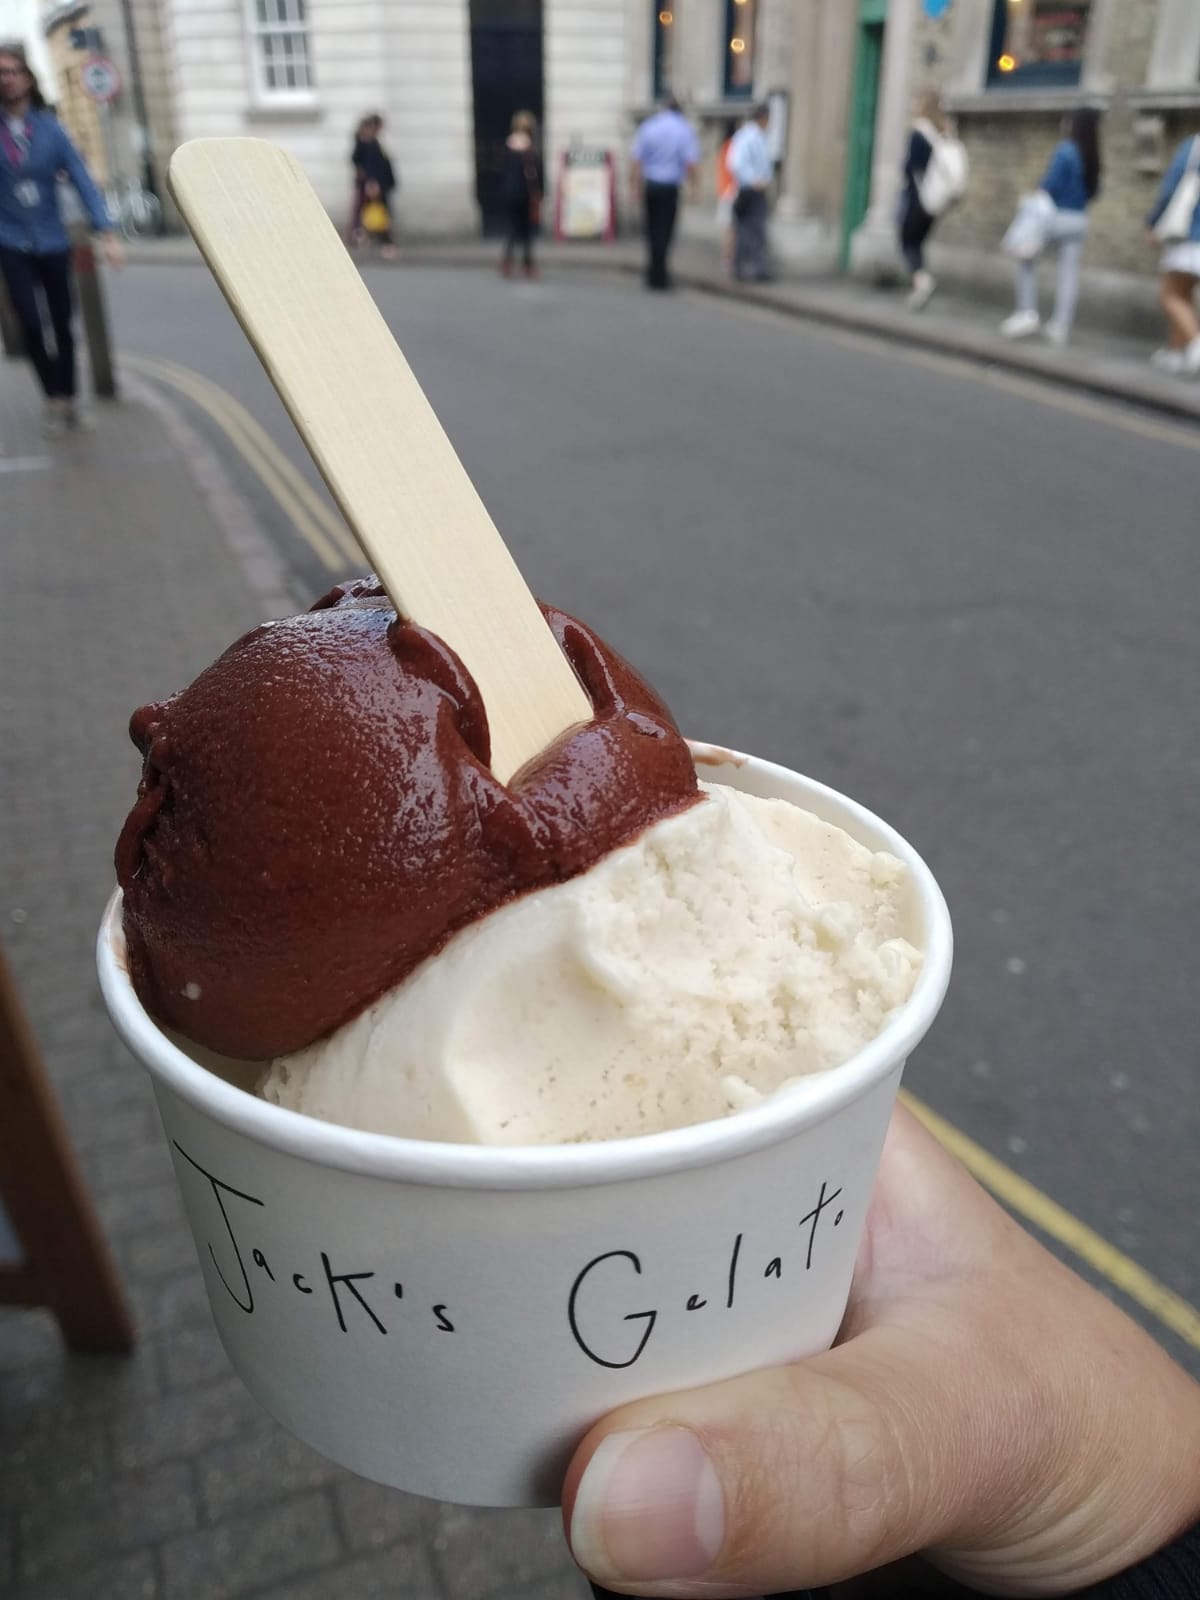 A photo of an ice cream from Jacks Gelato.